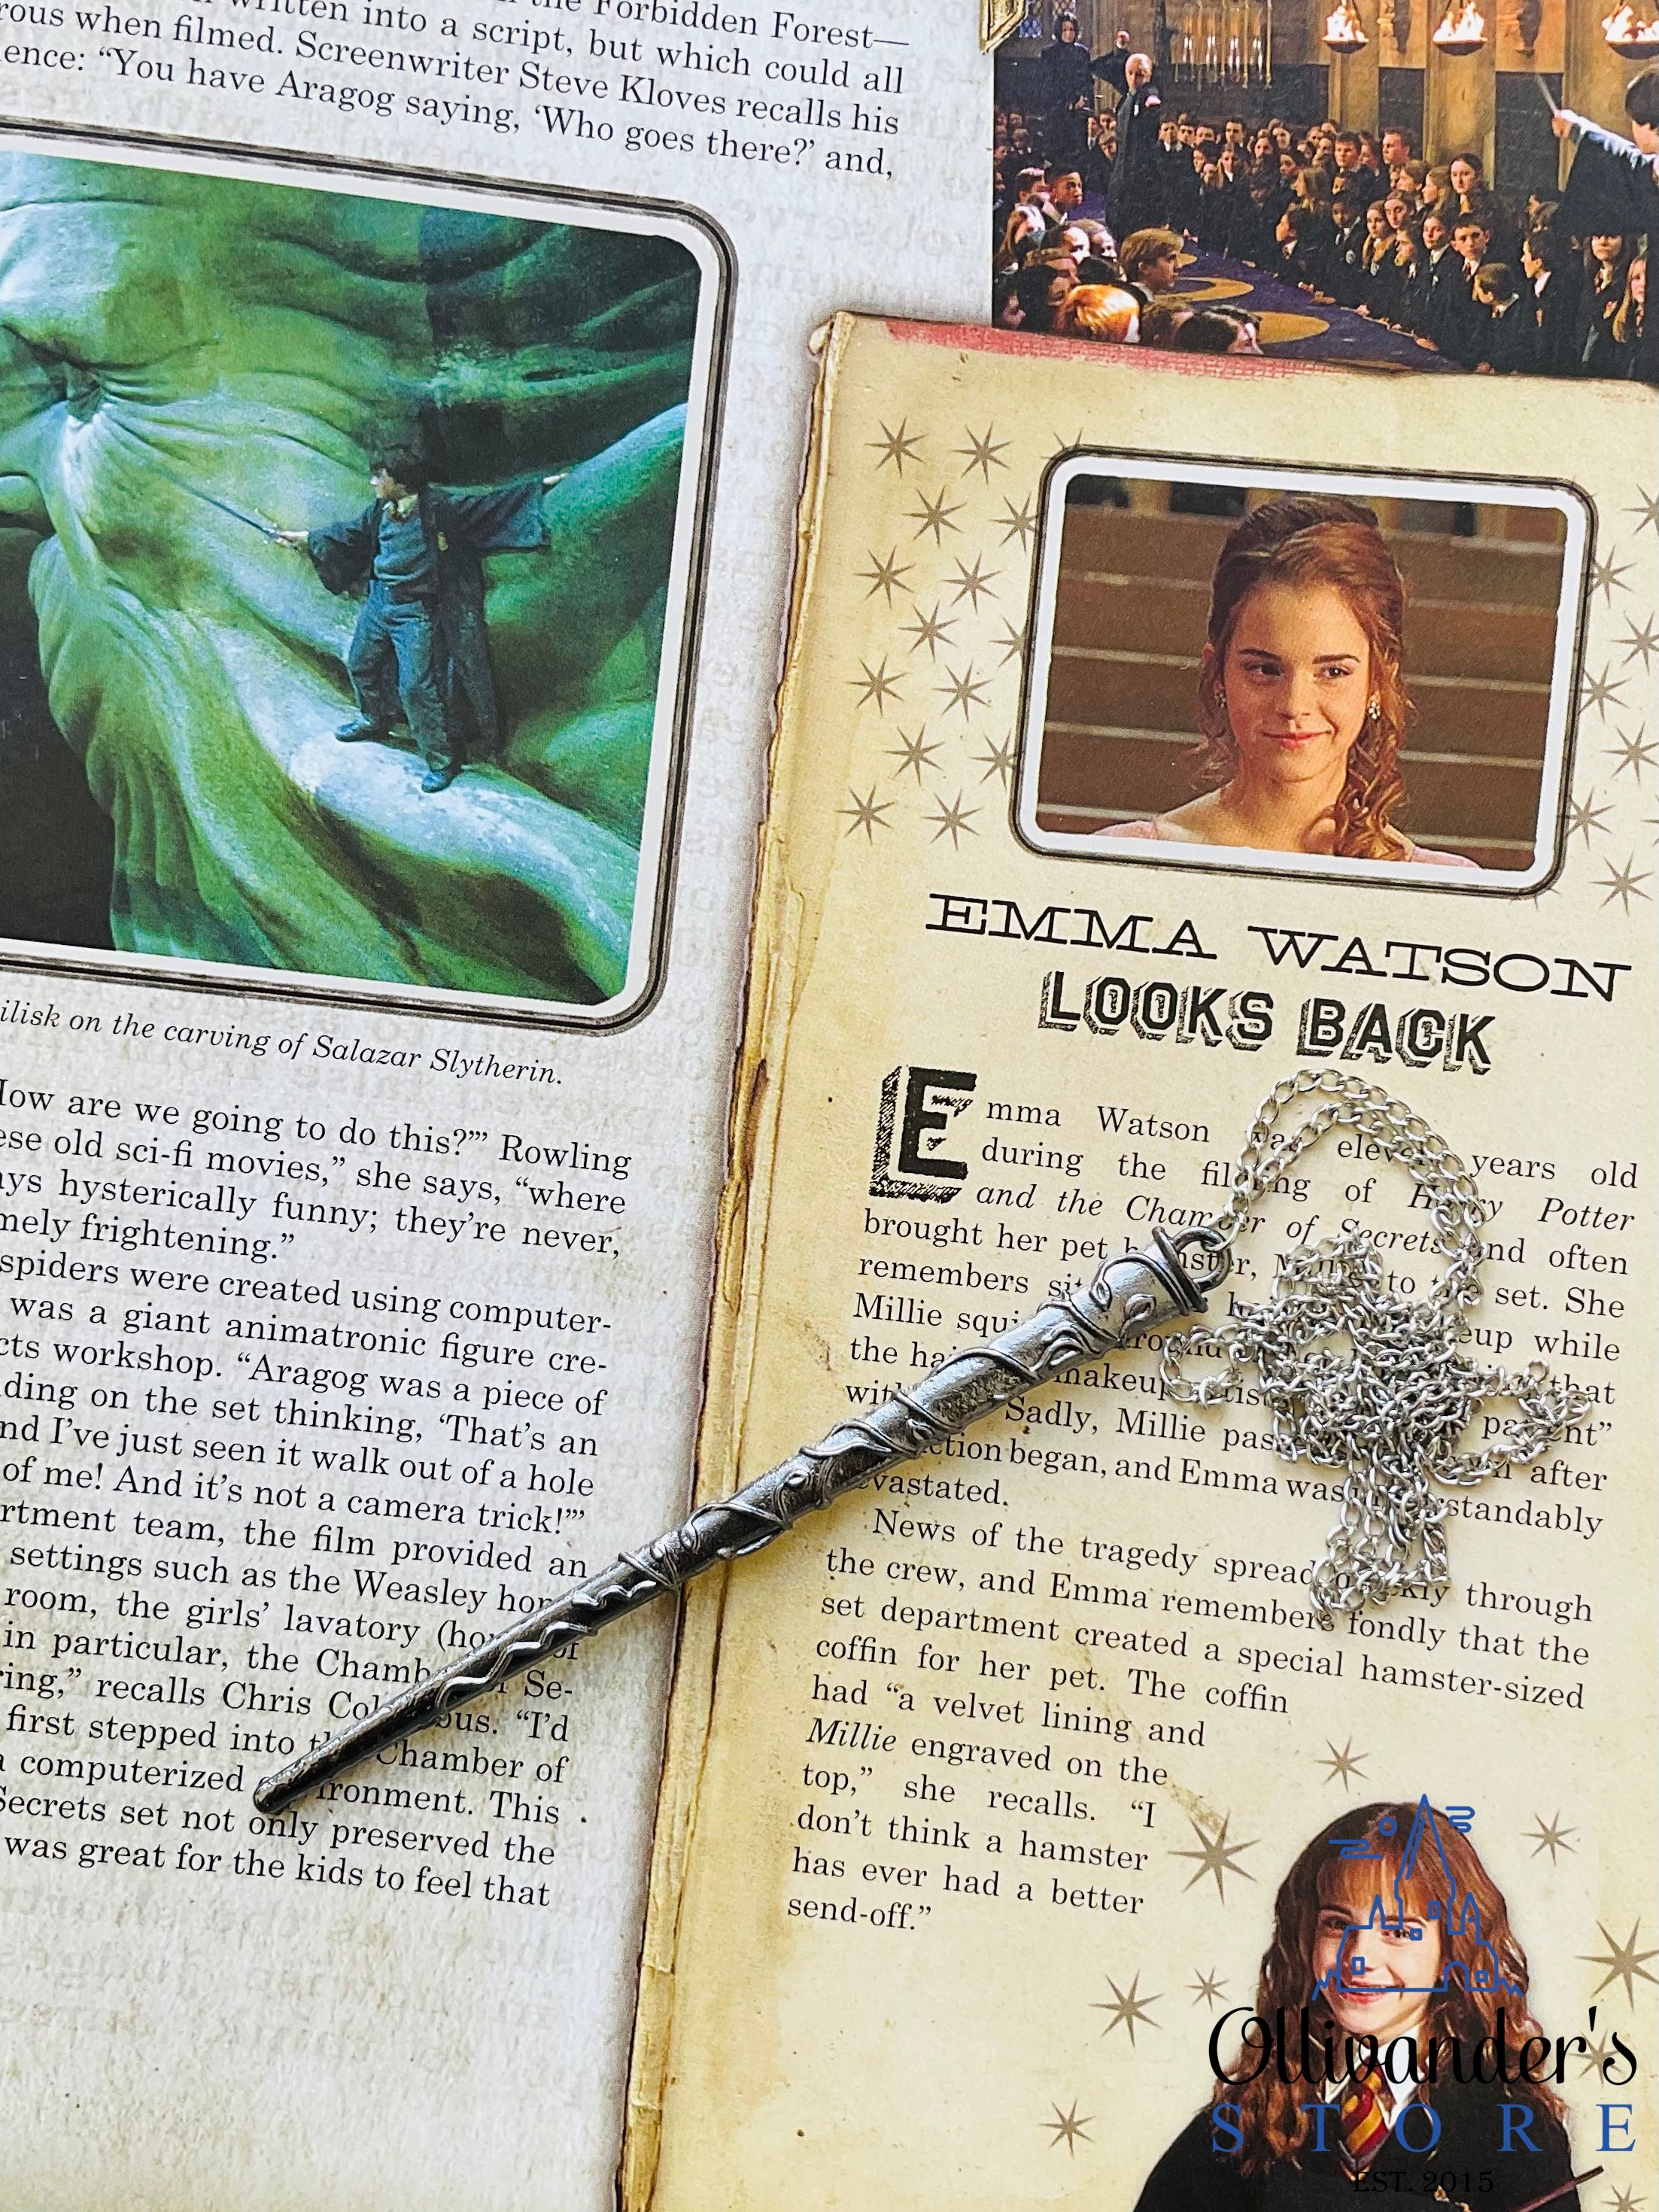 Hermione's wand necklace